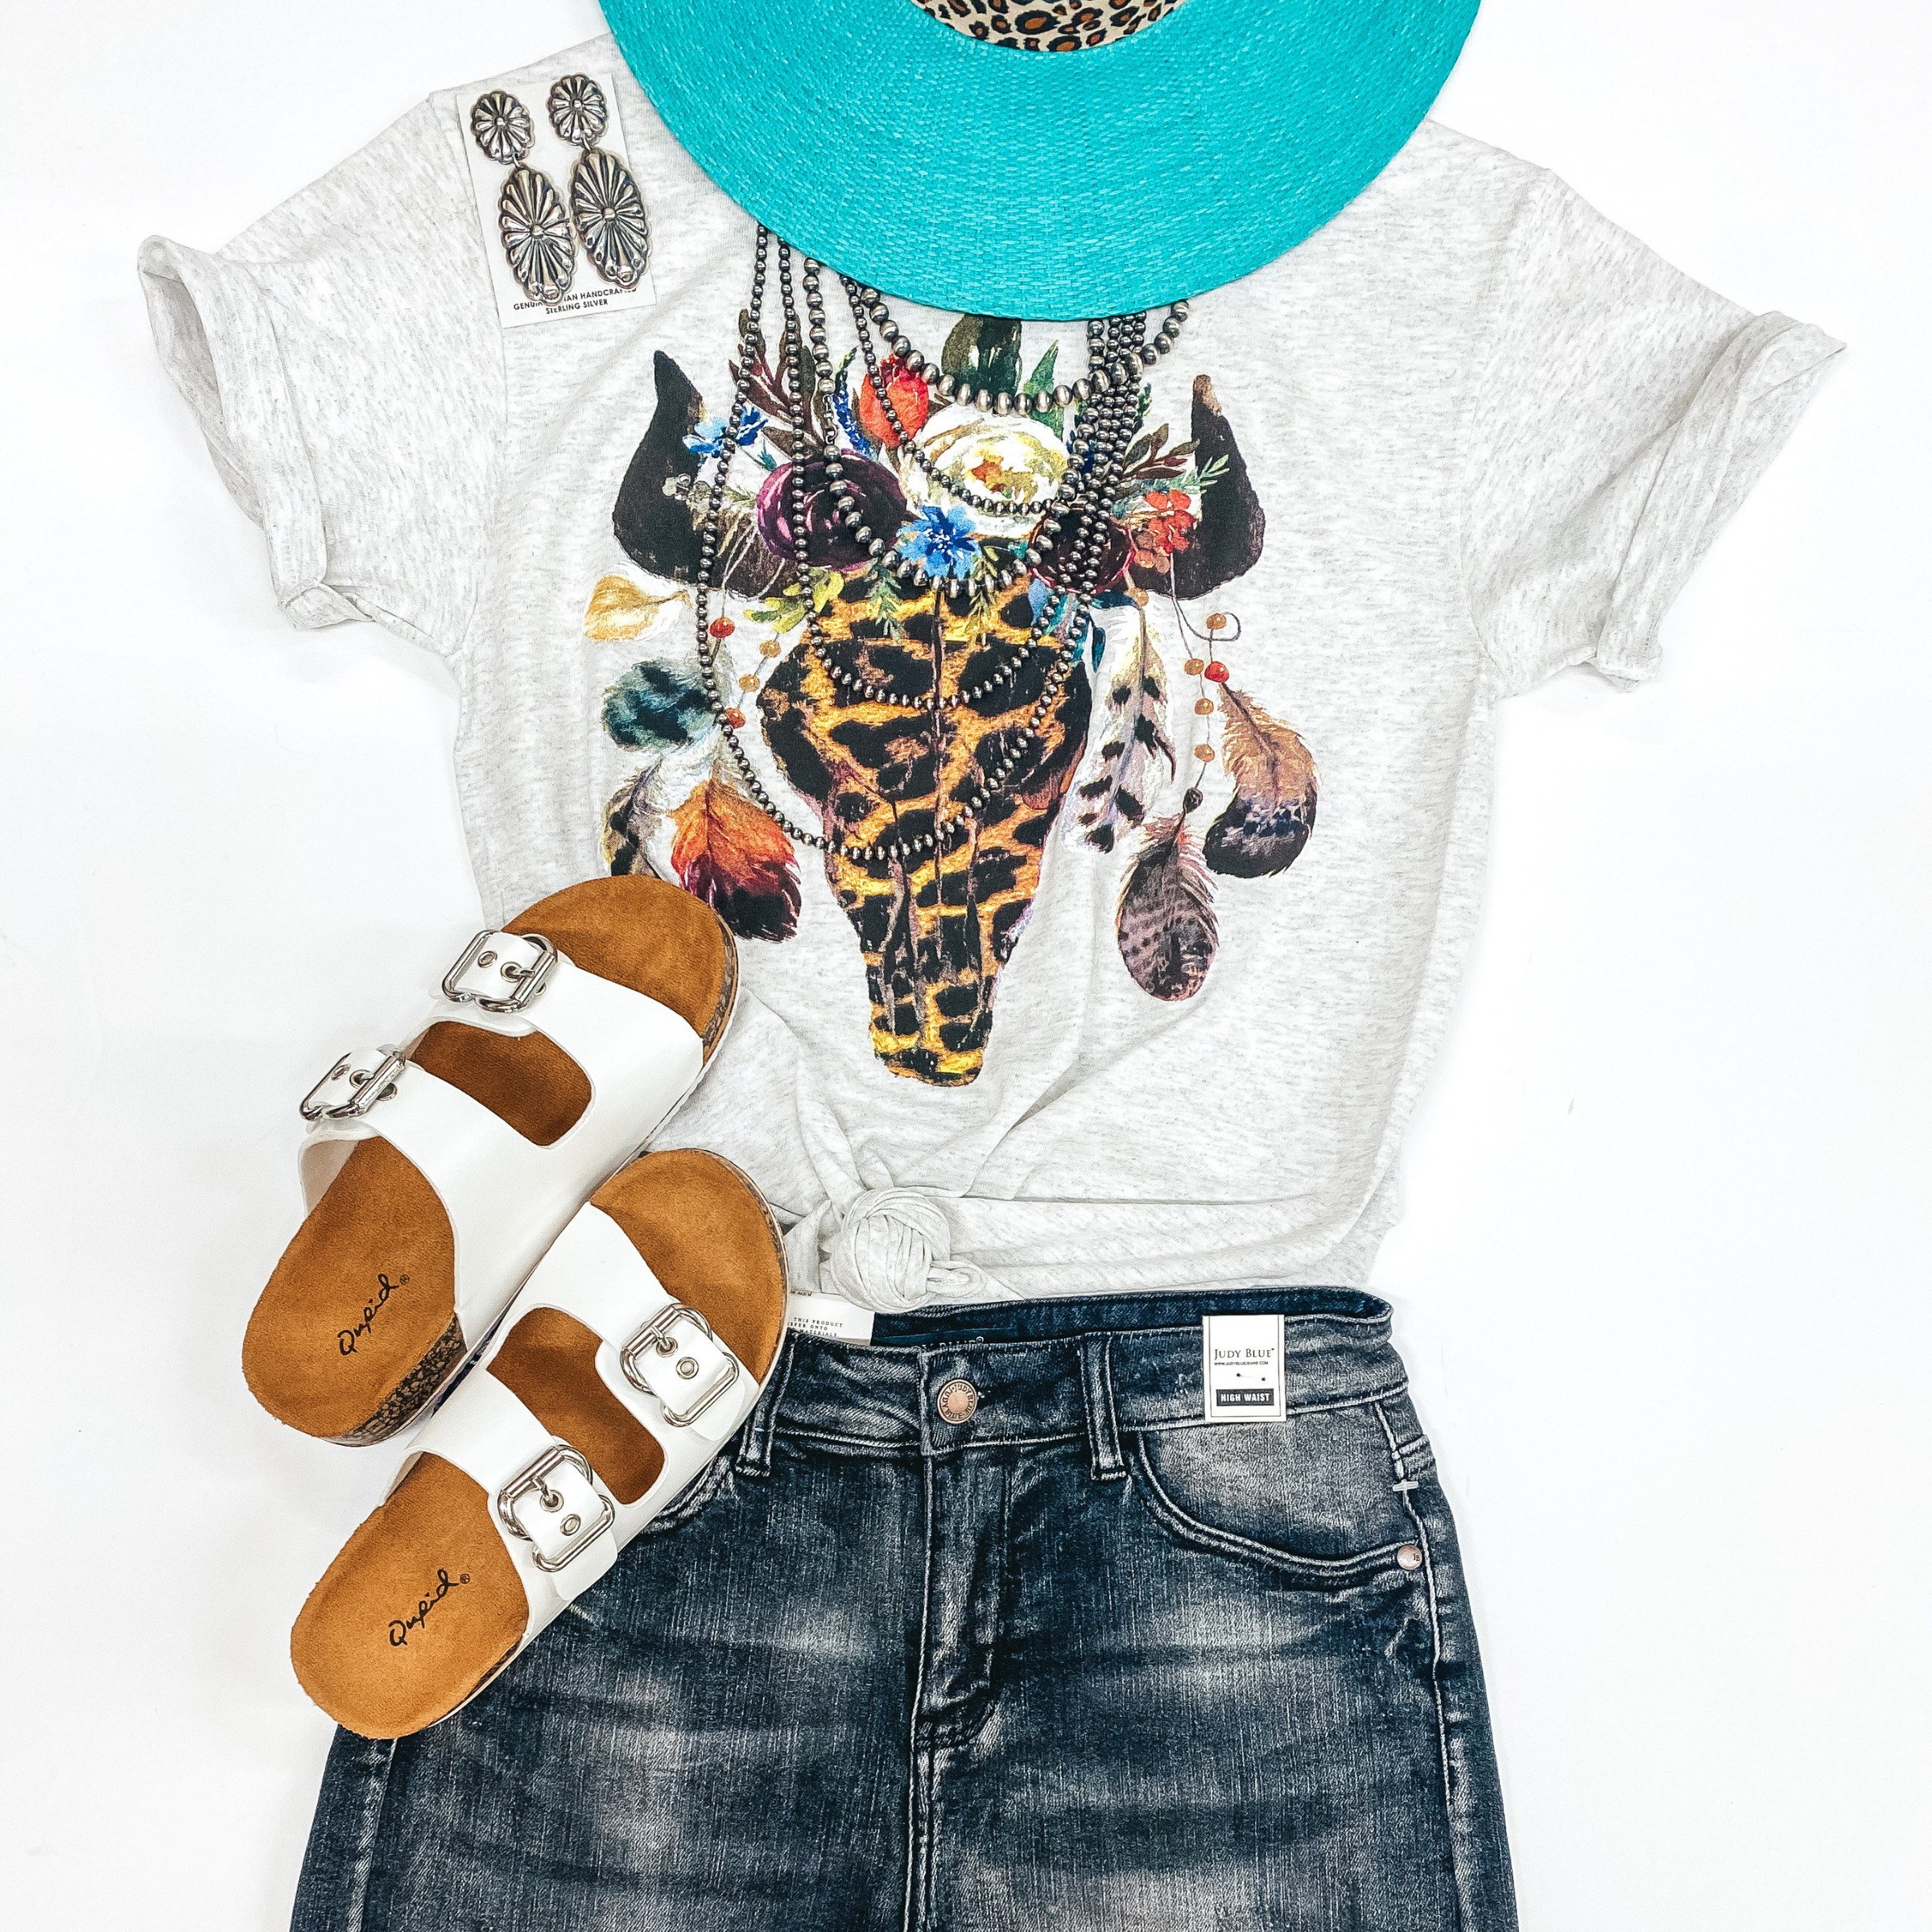 A heather grey tee shirt with a leopard print bull skull with flowers and feathers. Pictured with a turquoise straw hat, genuine Navajo jewelry, white sandals, and denim shorts.